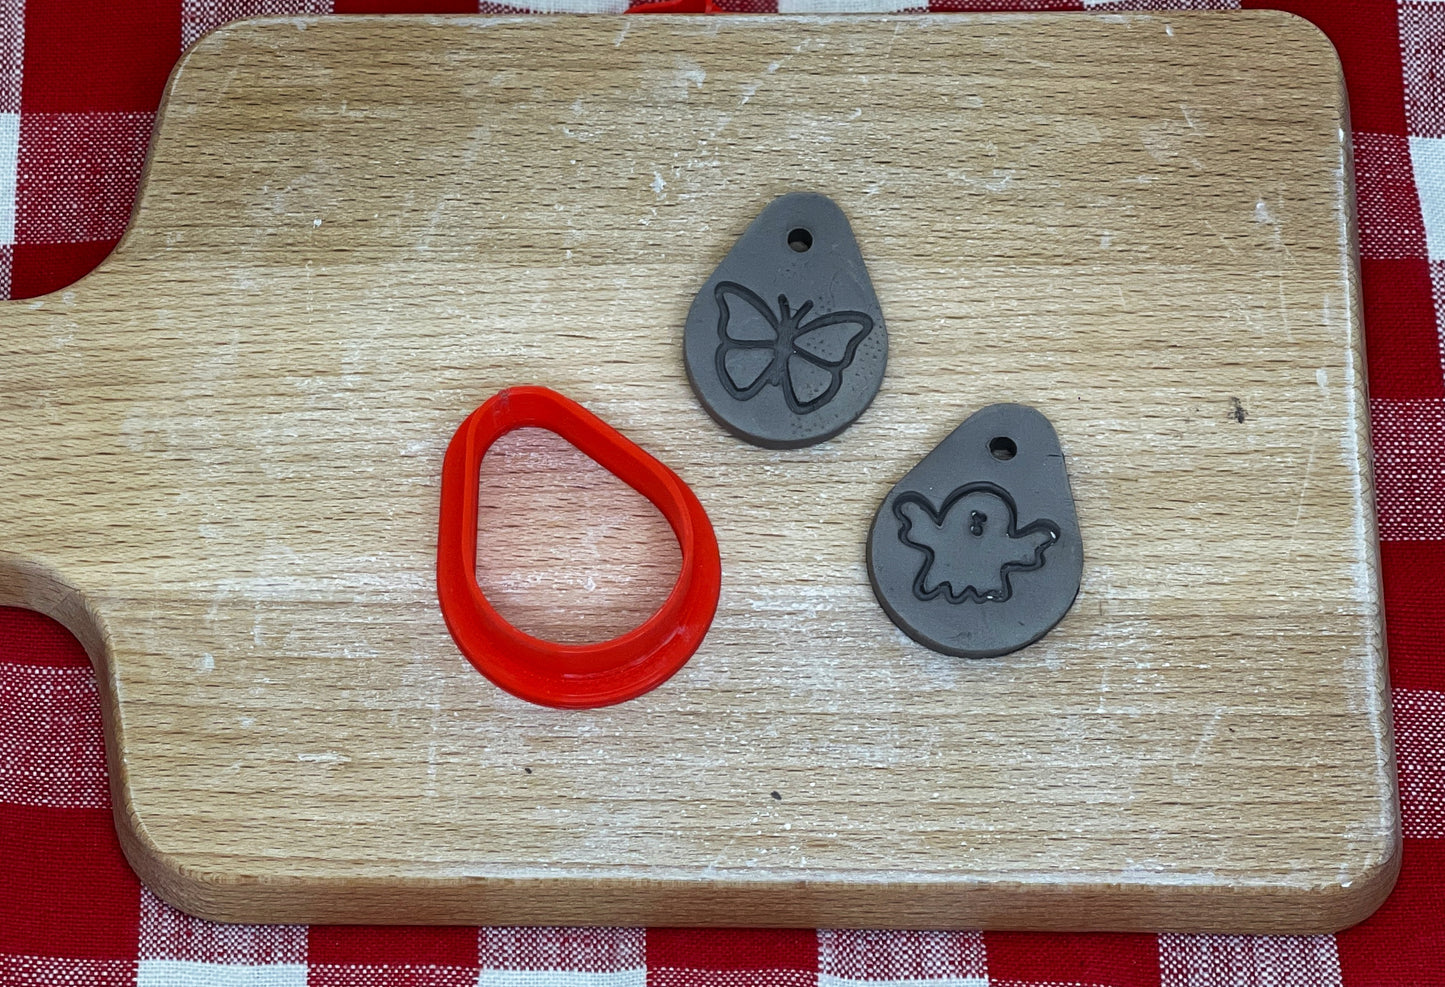 Pendant Clay Cutter - Pottery Tool, plastic 3D printed, choose size up to 12" diameter